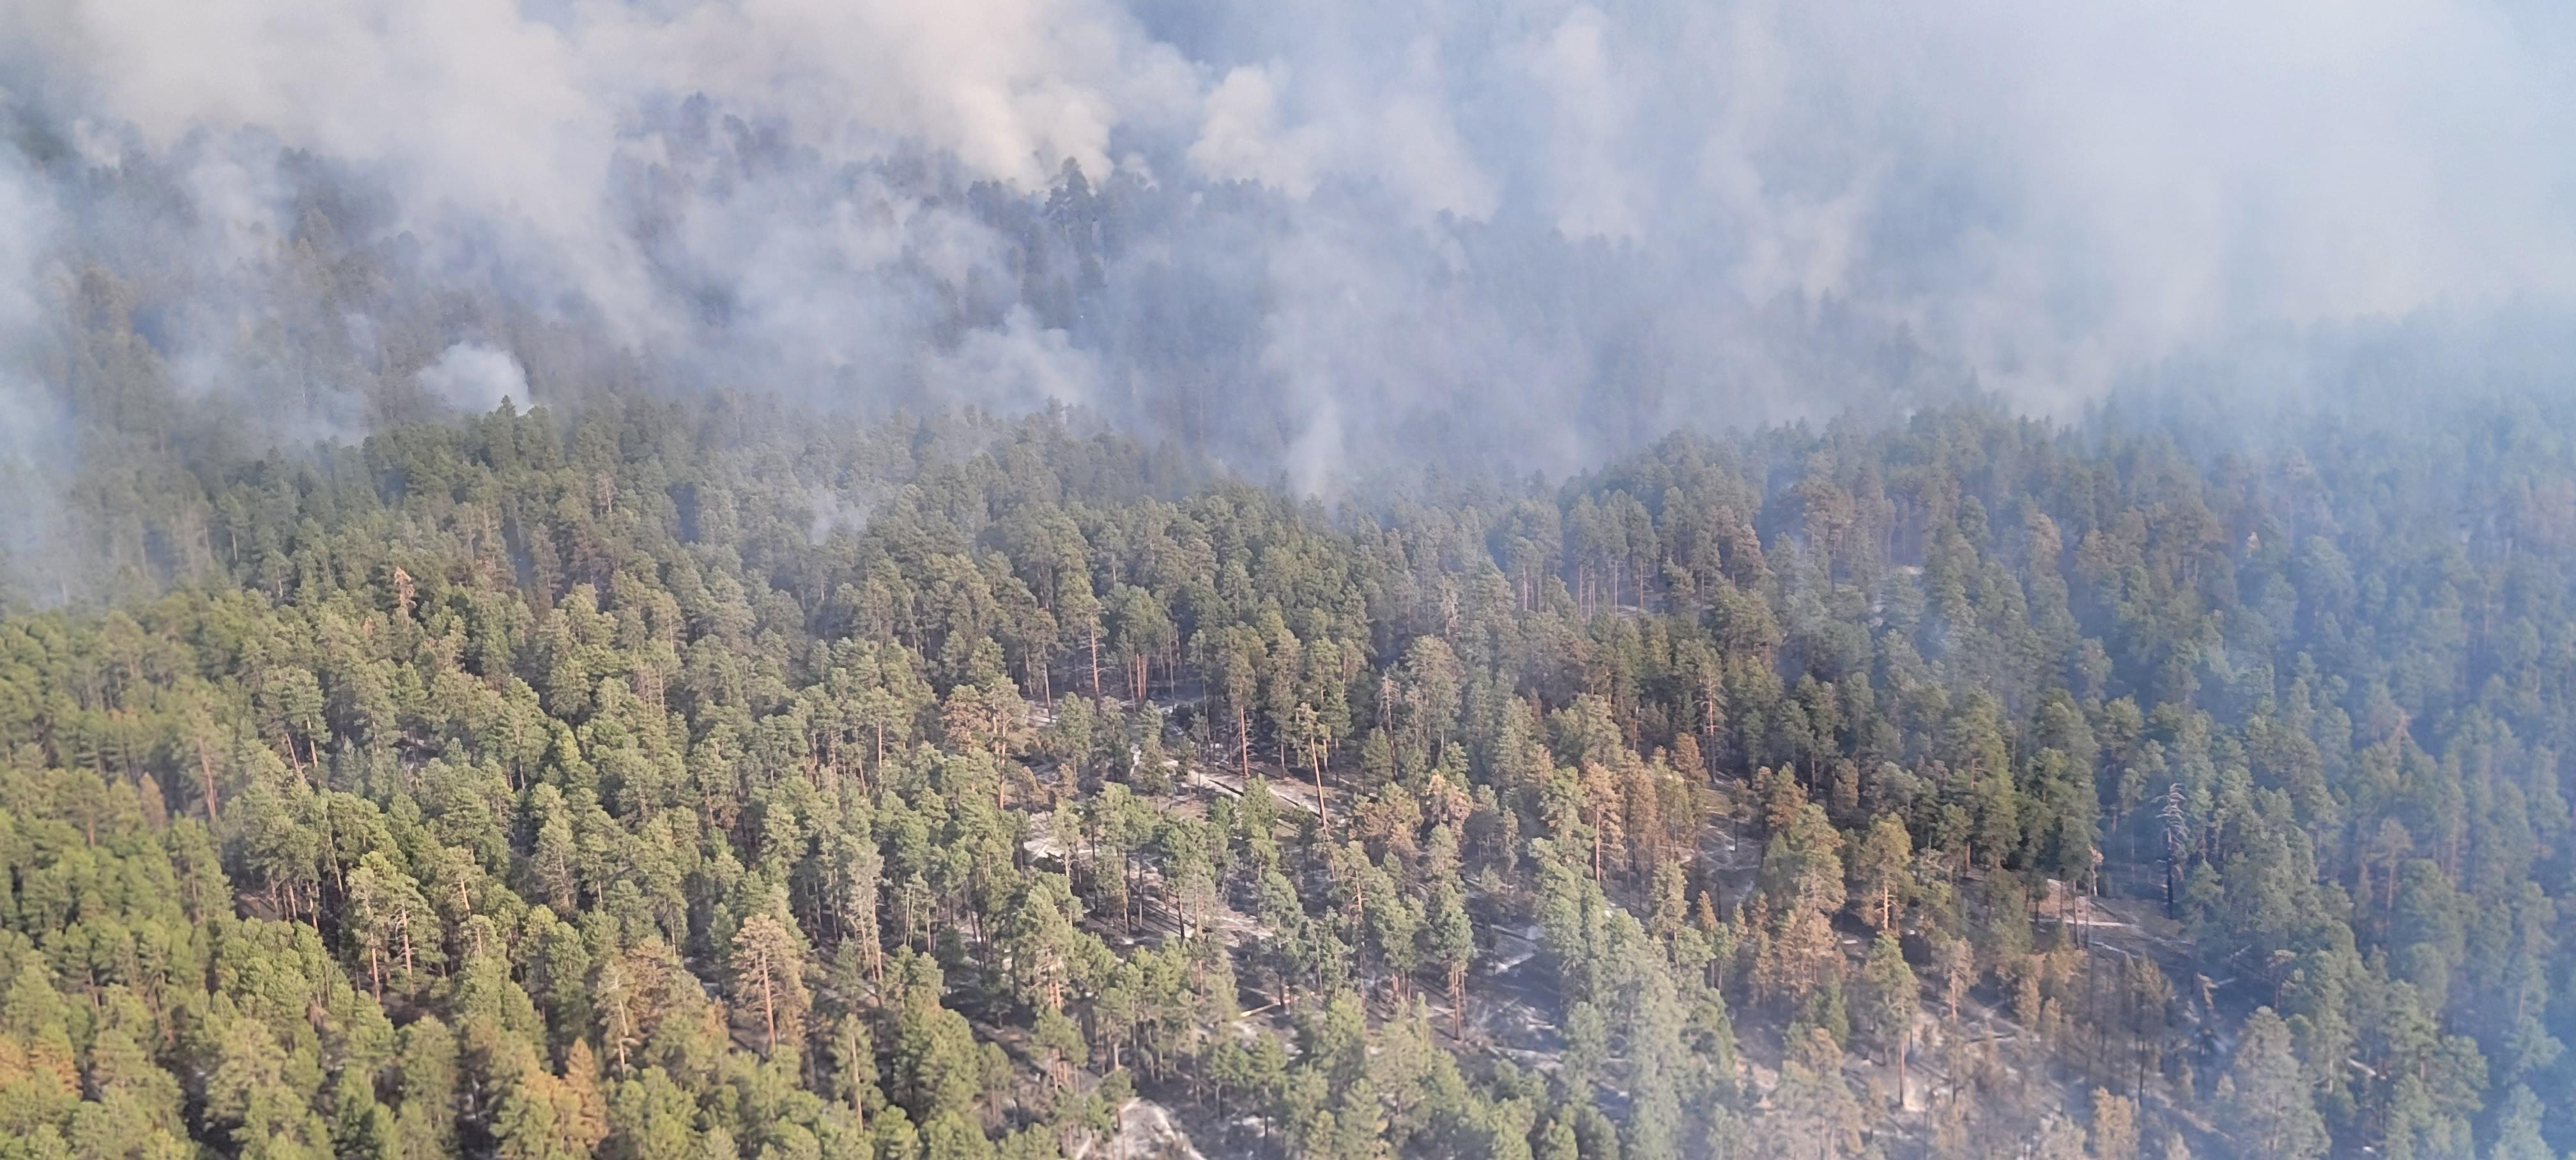 Aerial view of the Dragon seen burning through continuous ponderosa pine forest on 7-21-2022